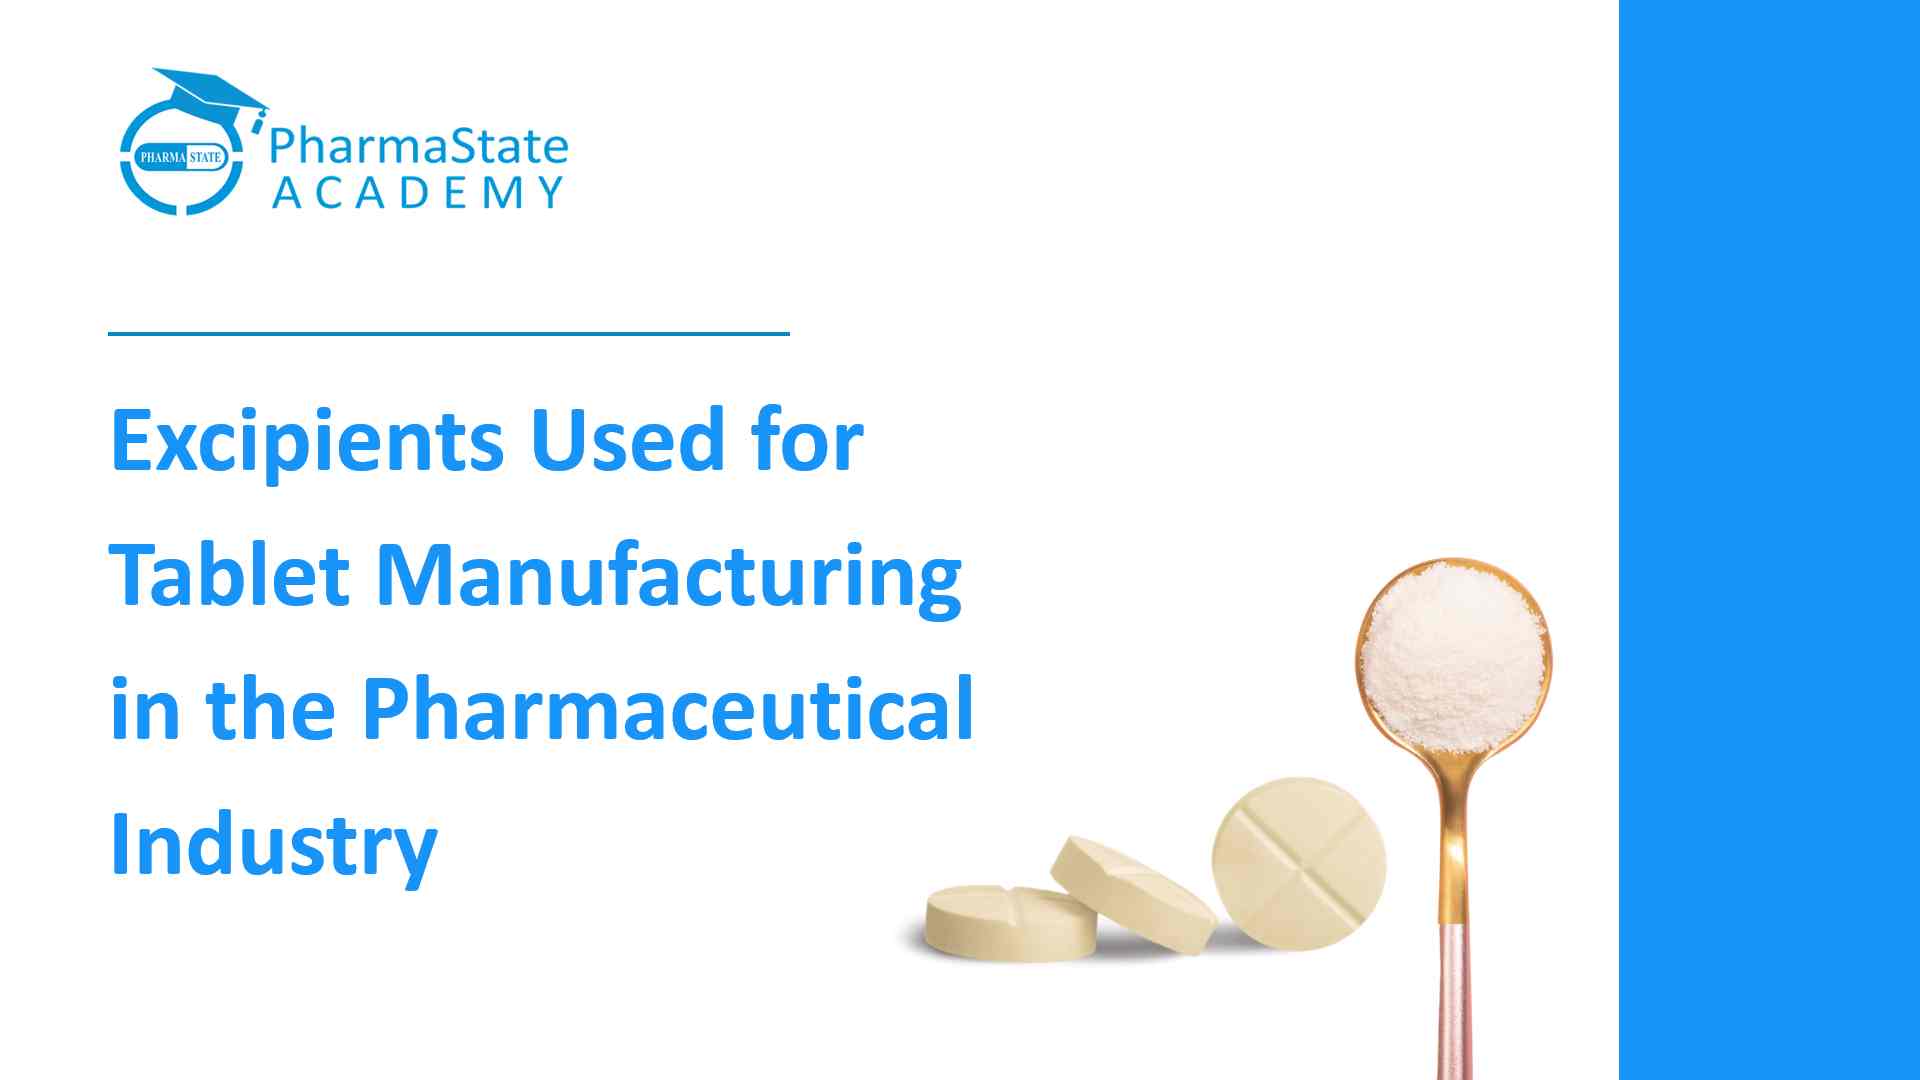 Excipients Used for Tablet Manufacturing in the Pharmaceutical Industry